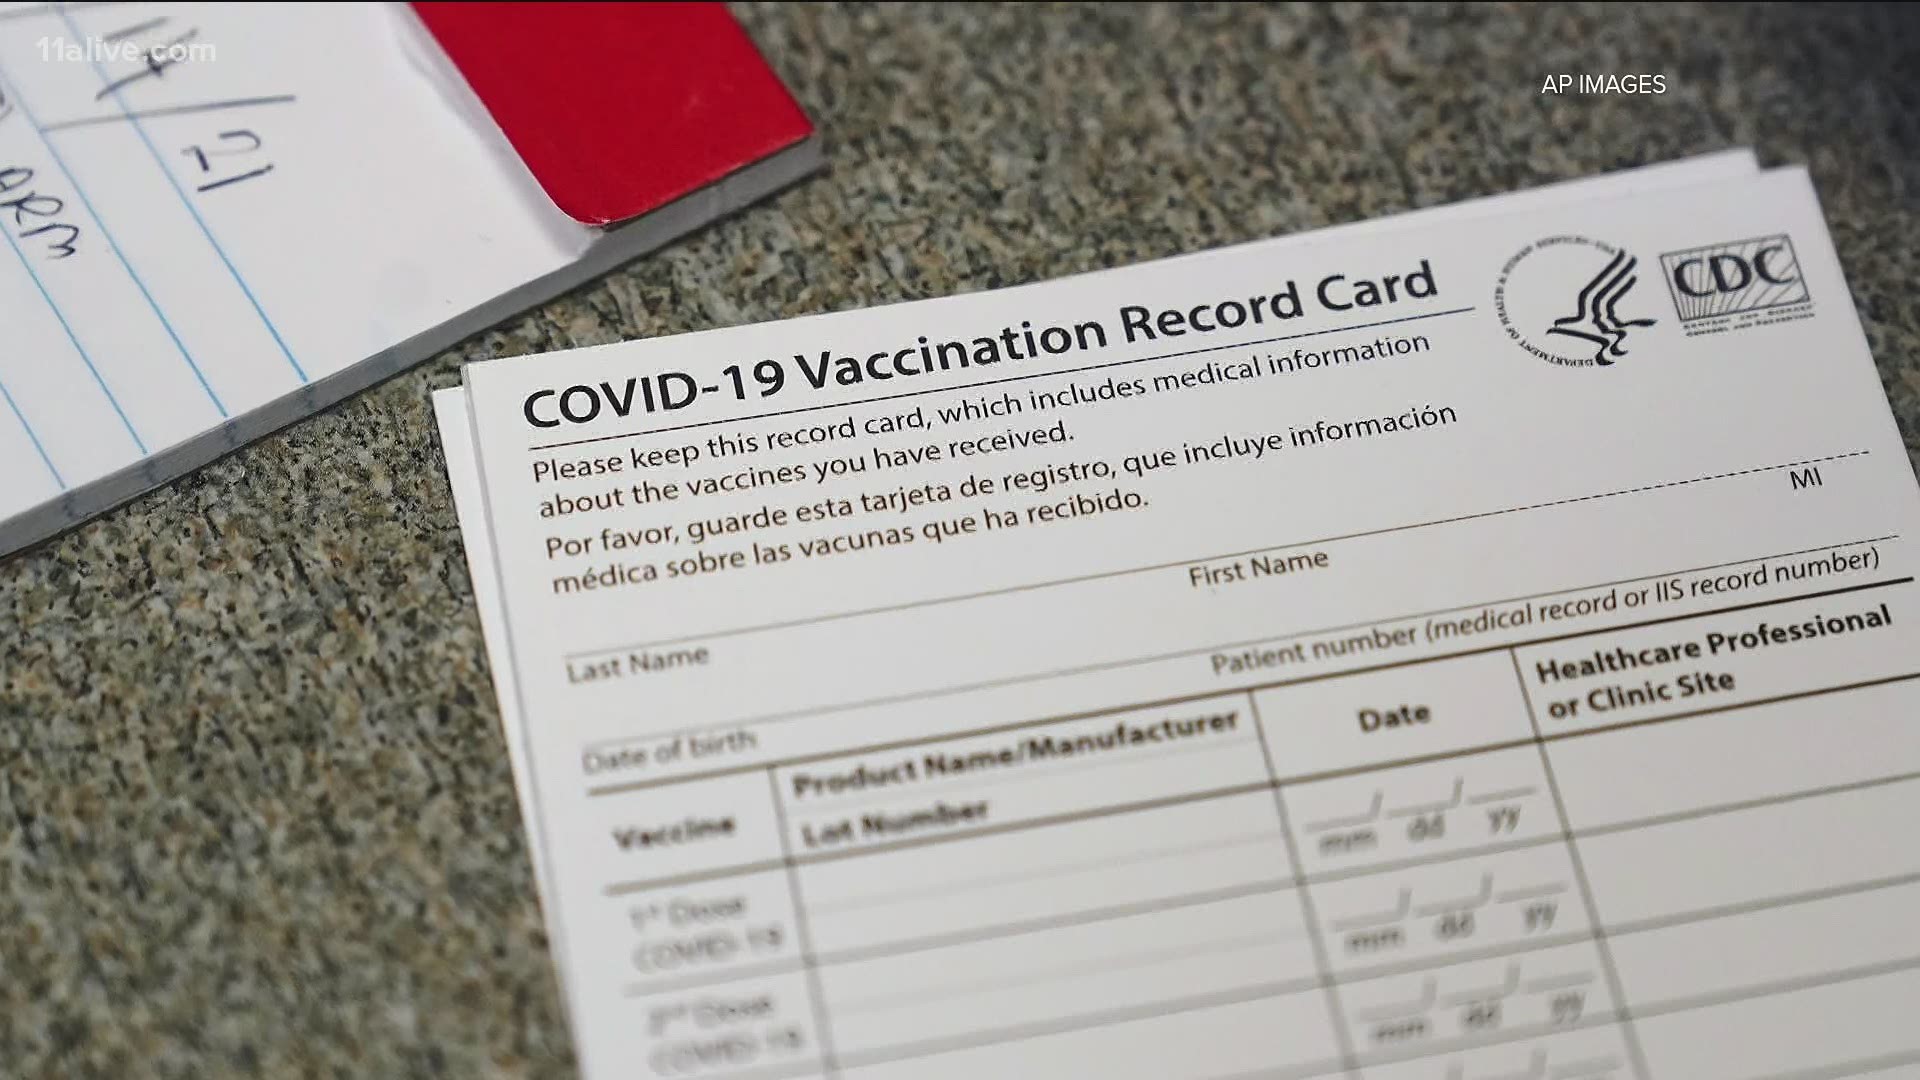 Here's how to protect yourself from becoming a victim of vaccine scams.